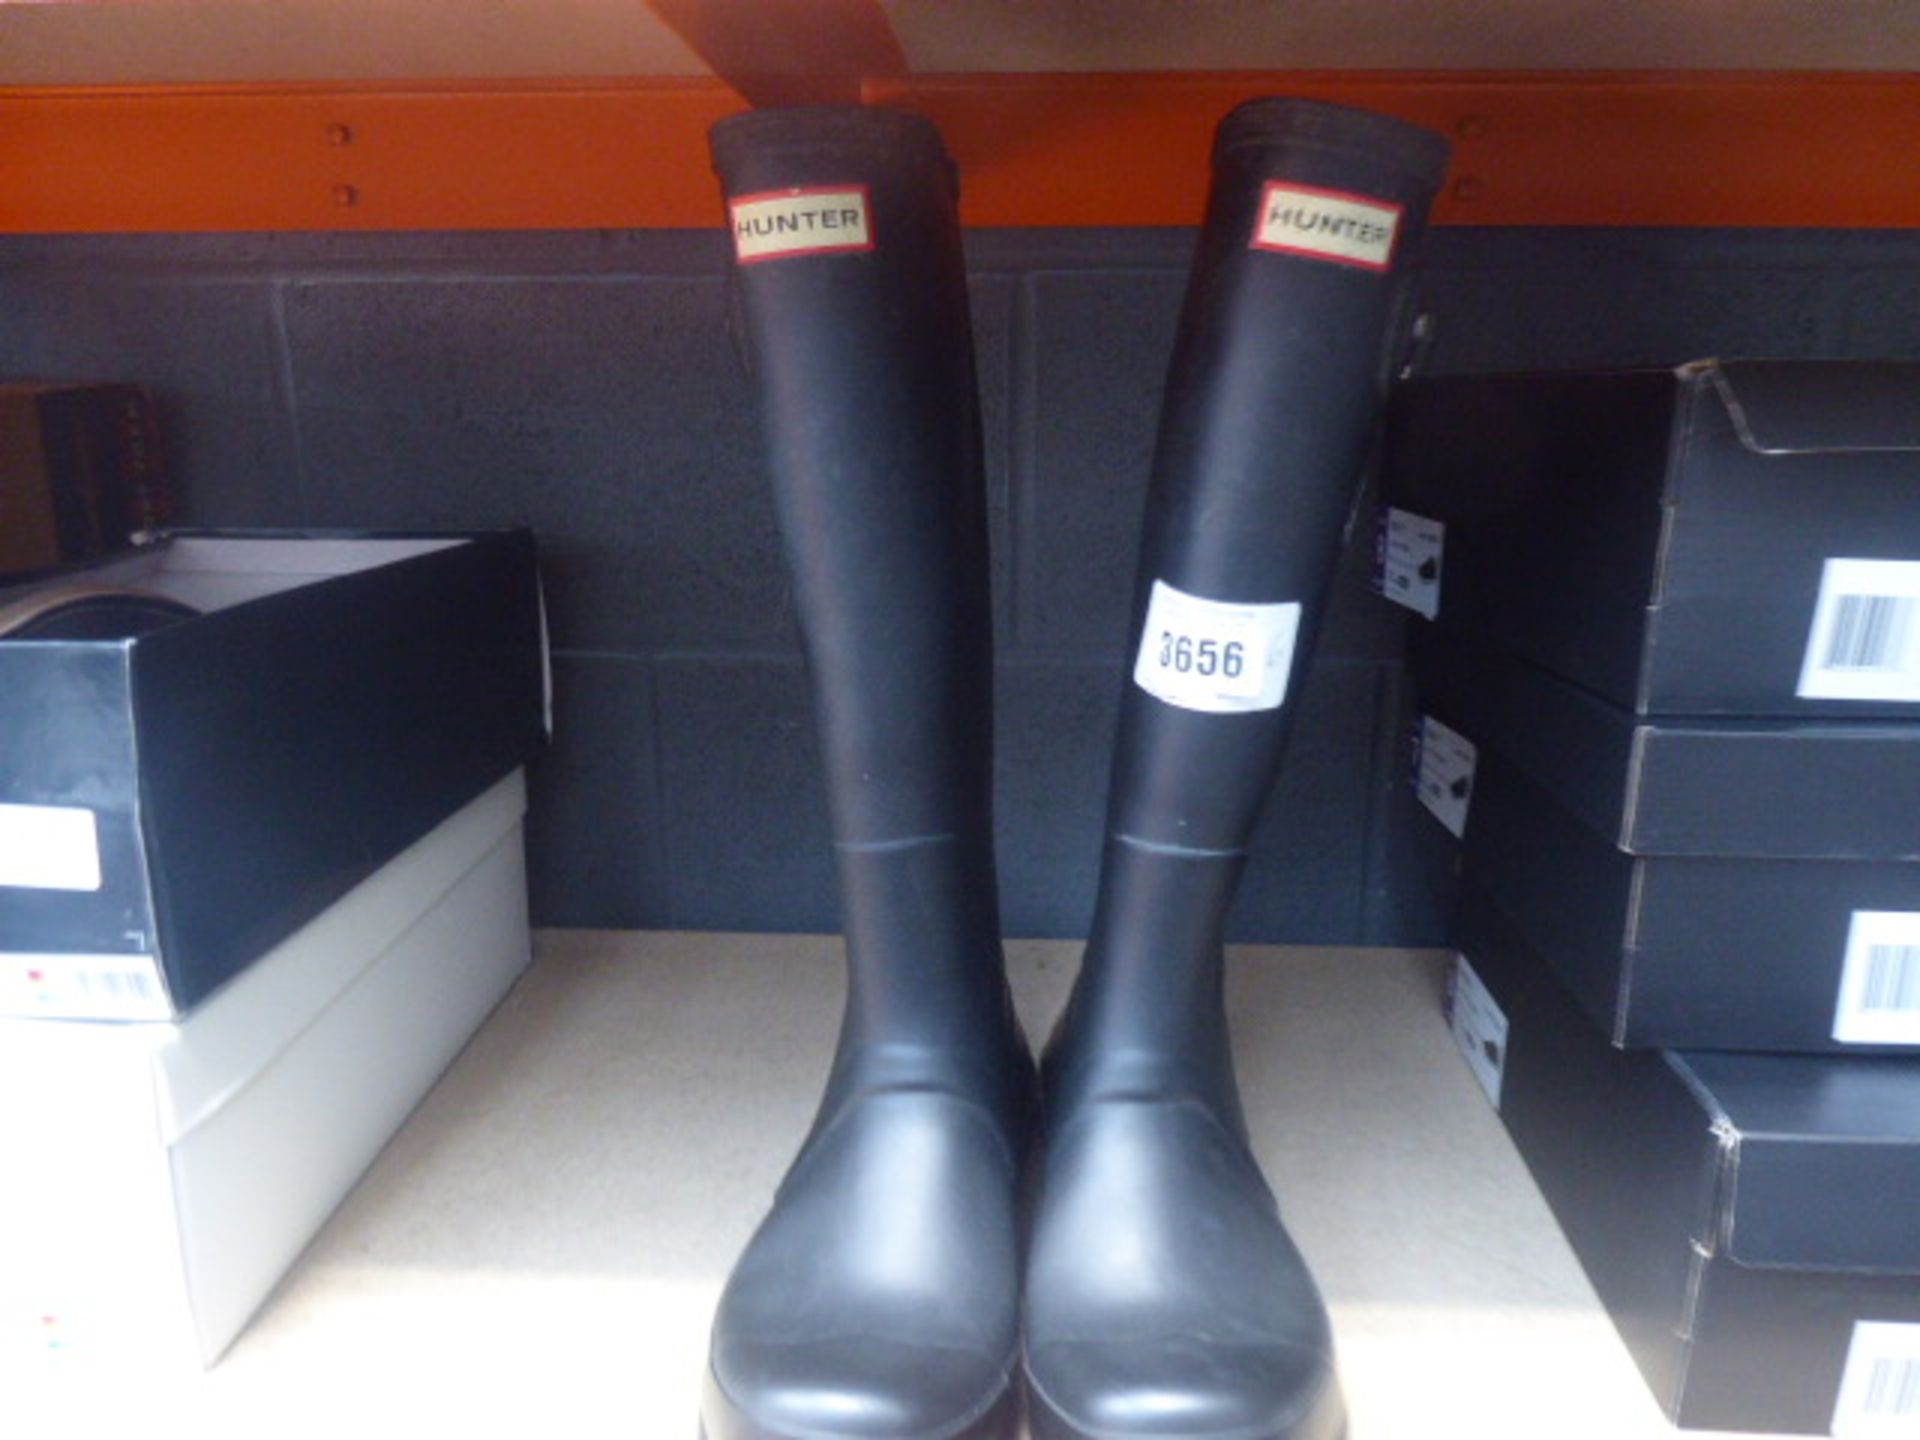 Pair of size 6 used adult black Hunter wellies